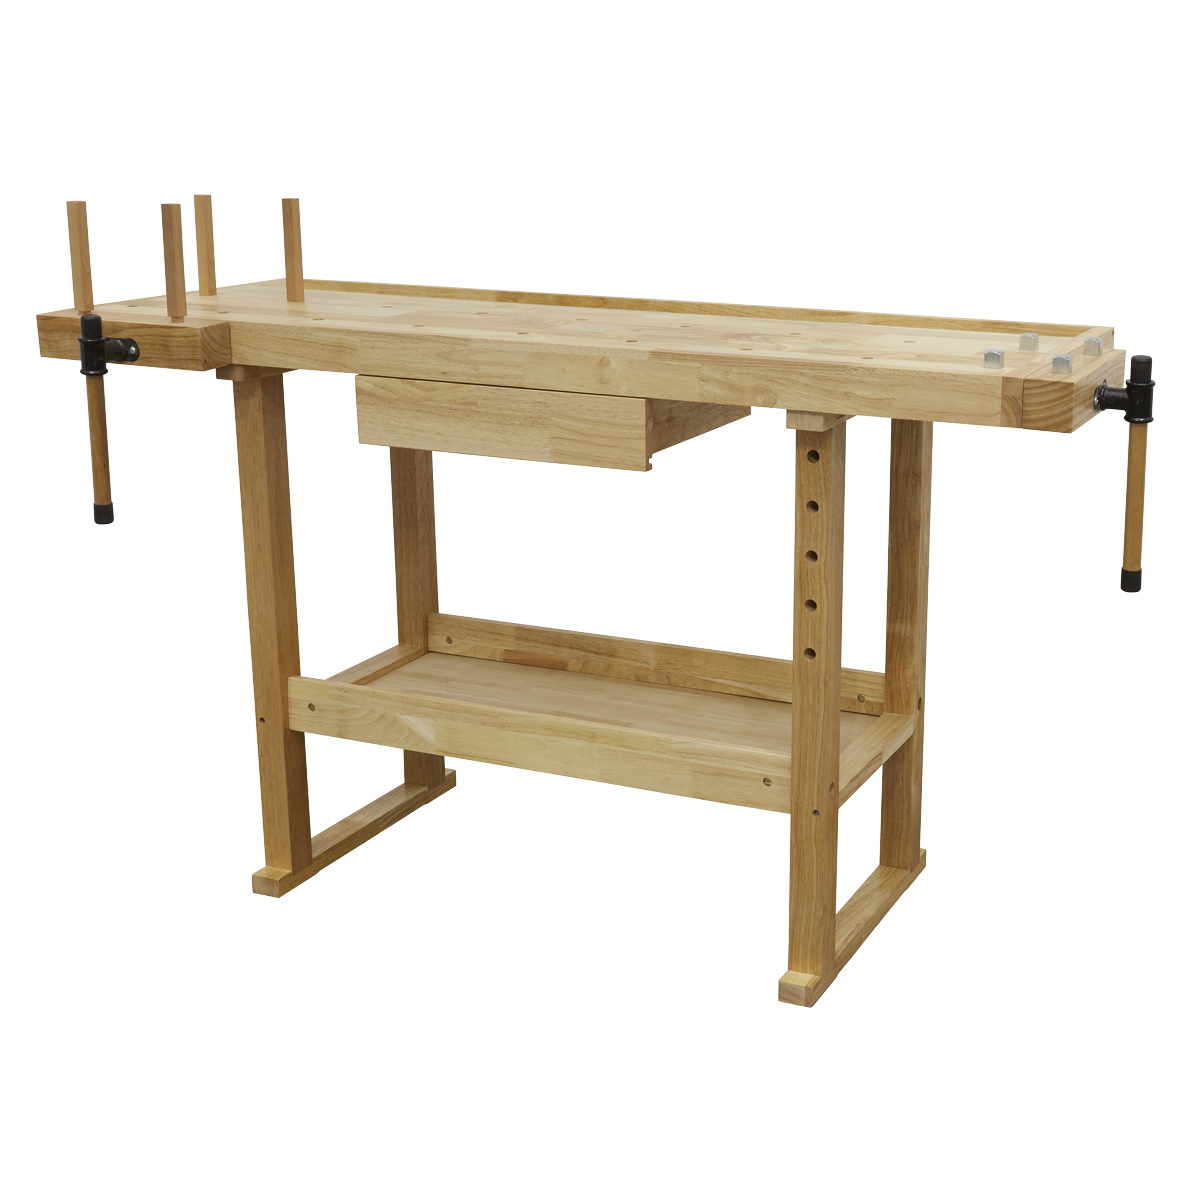 Sealey Woodworking Bench